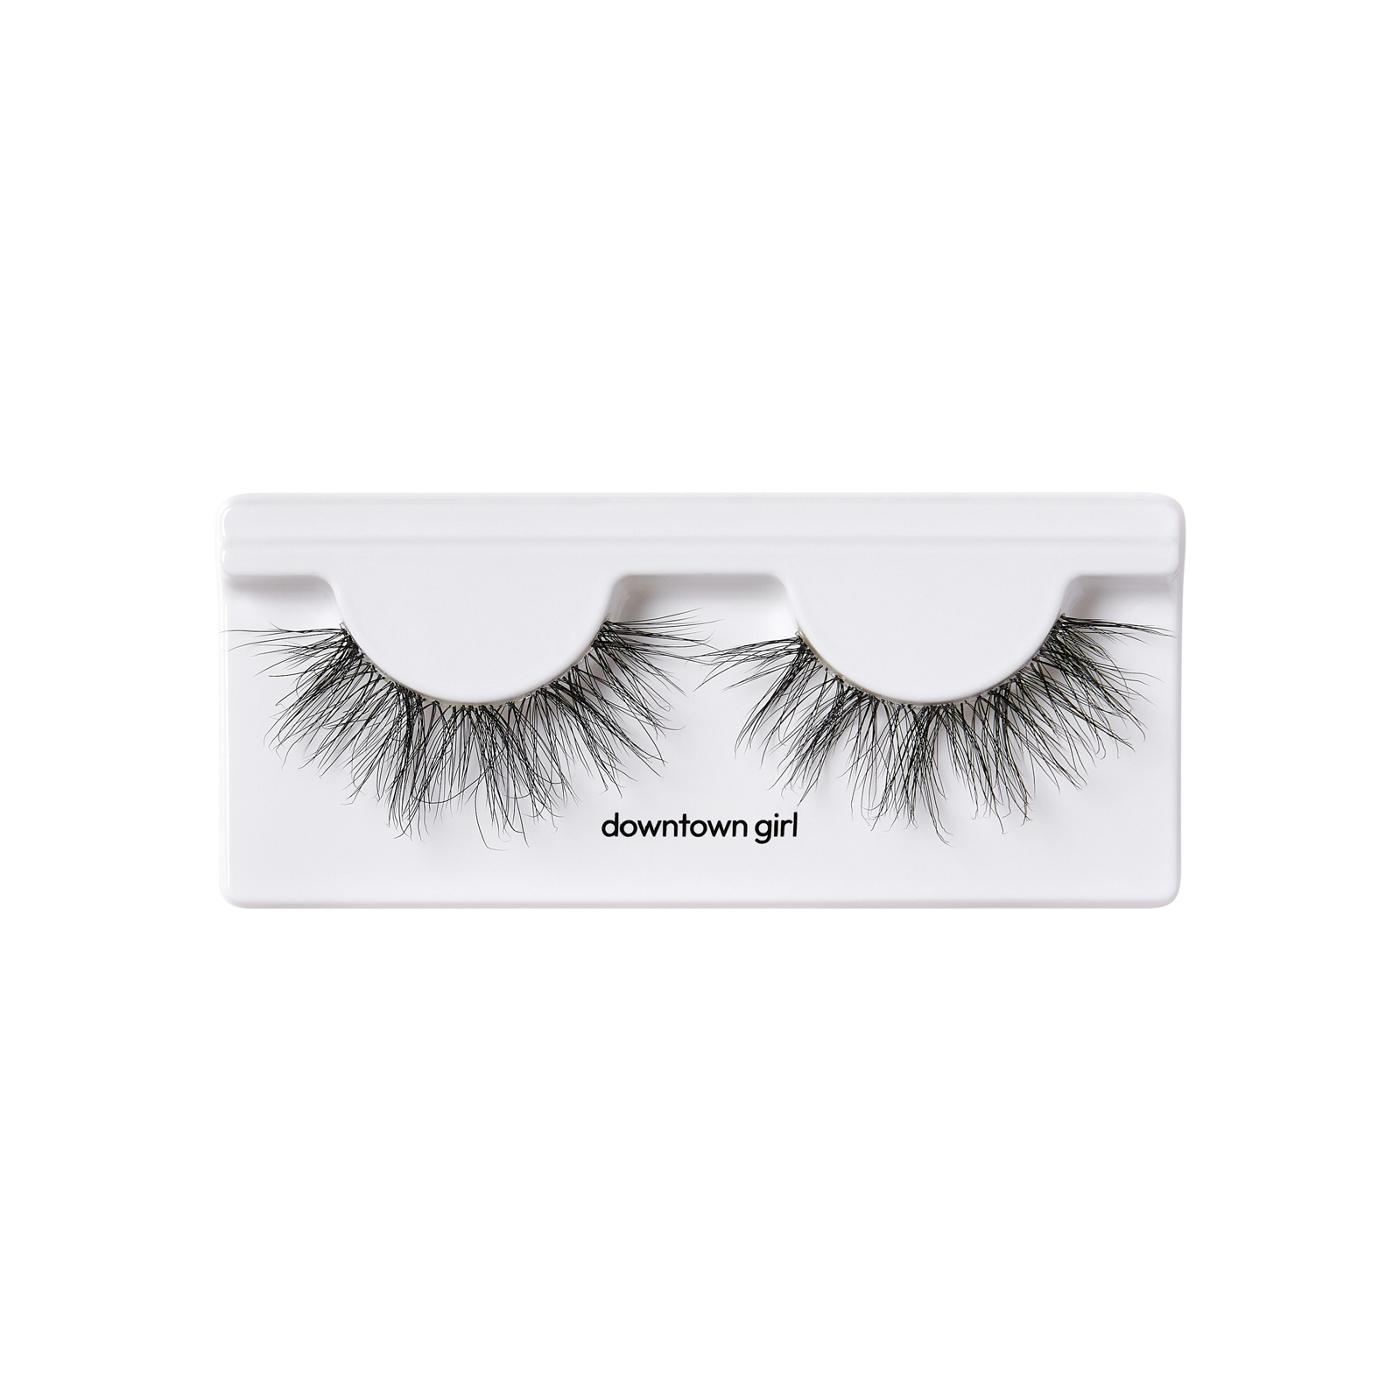 KISS Rebel Lash Couture Lashes - Downtown Girl ; image 3 of 5